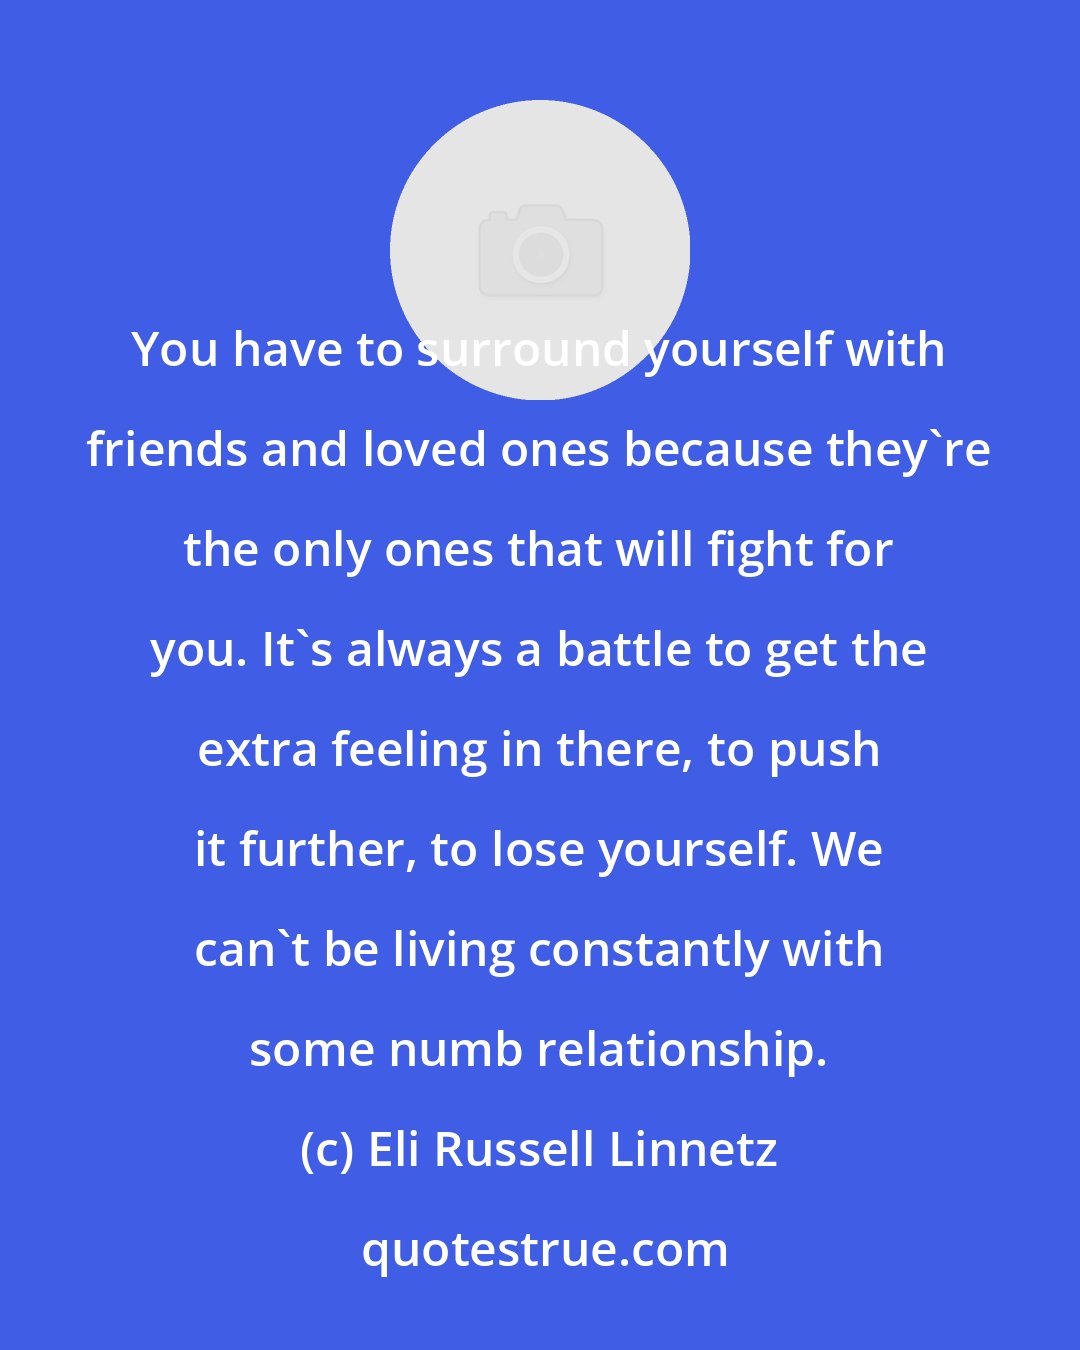 Eli Russell Linnetz: You have to surround yourself with friends and loved ones because they're the only ones that will fight for you. It's always a battle to get the extra feeling in there, to push it further, to lose yourself. We can't be living constantly with some numb relationship.